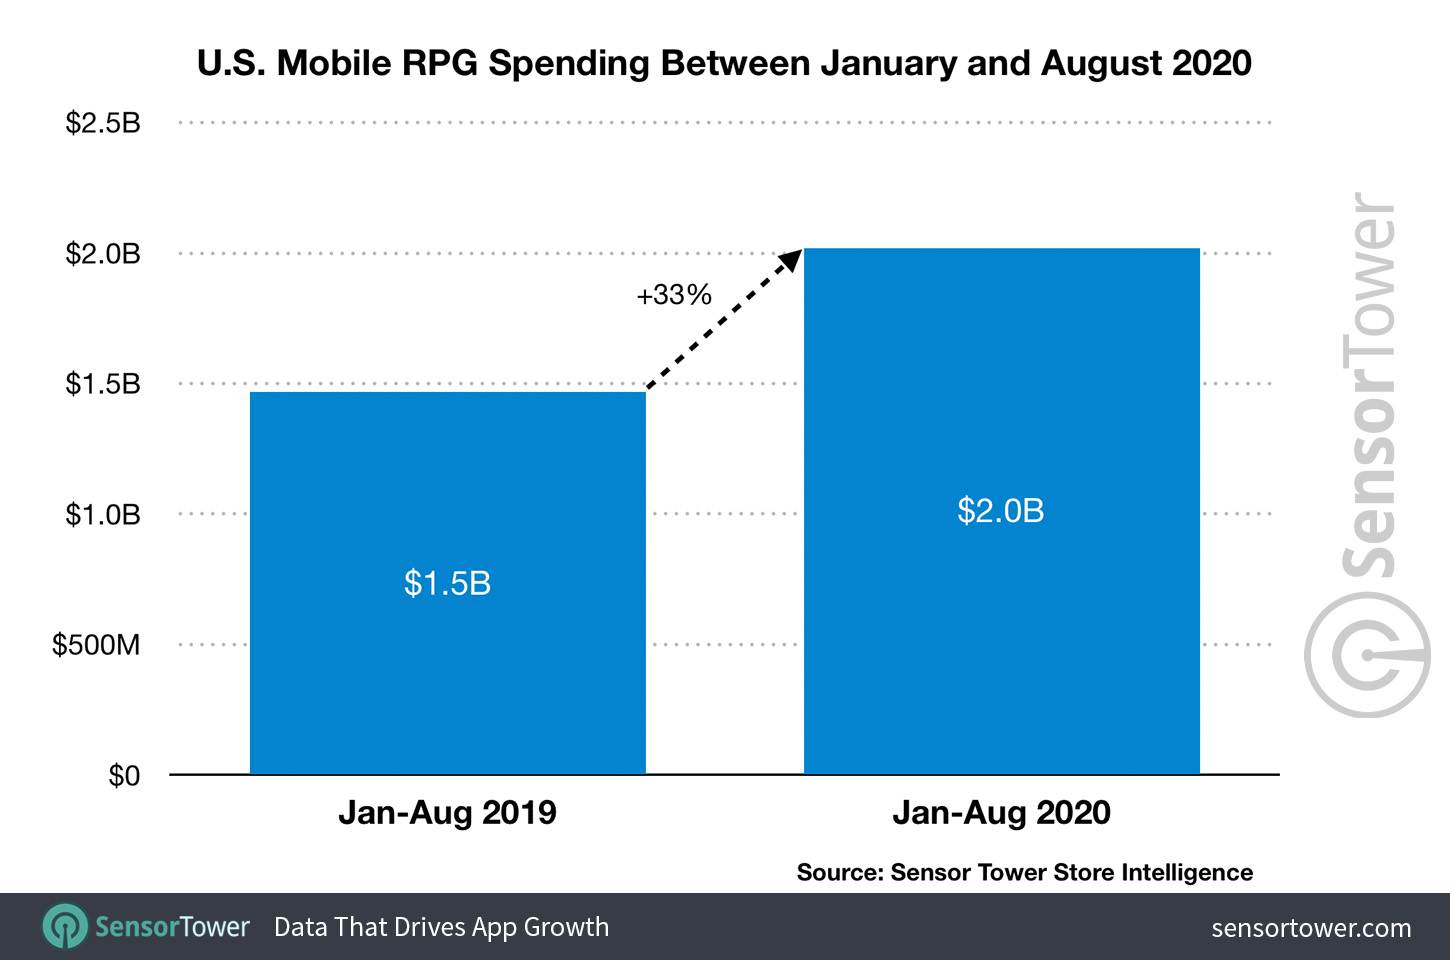 U.S. Mobile RPG Spending Between January and August 2020